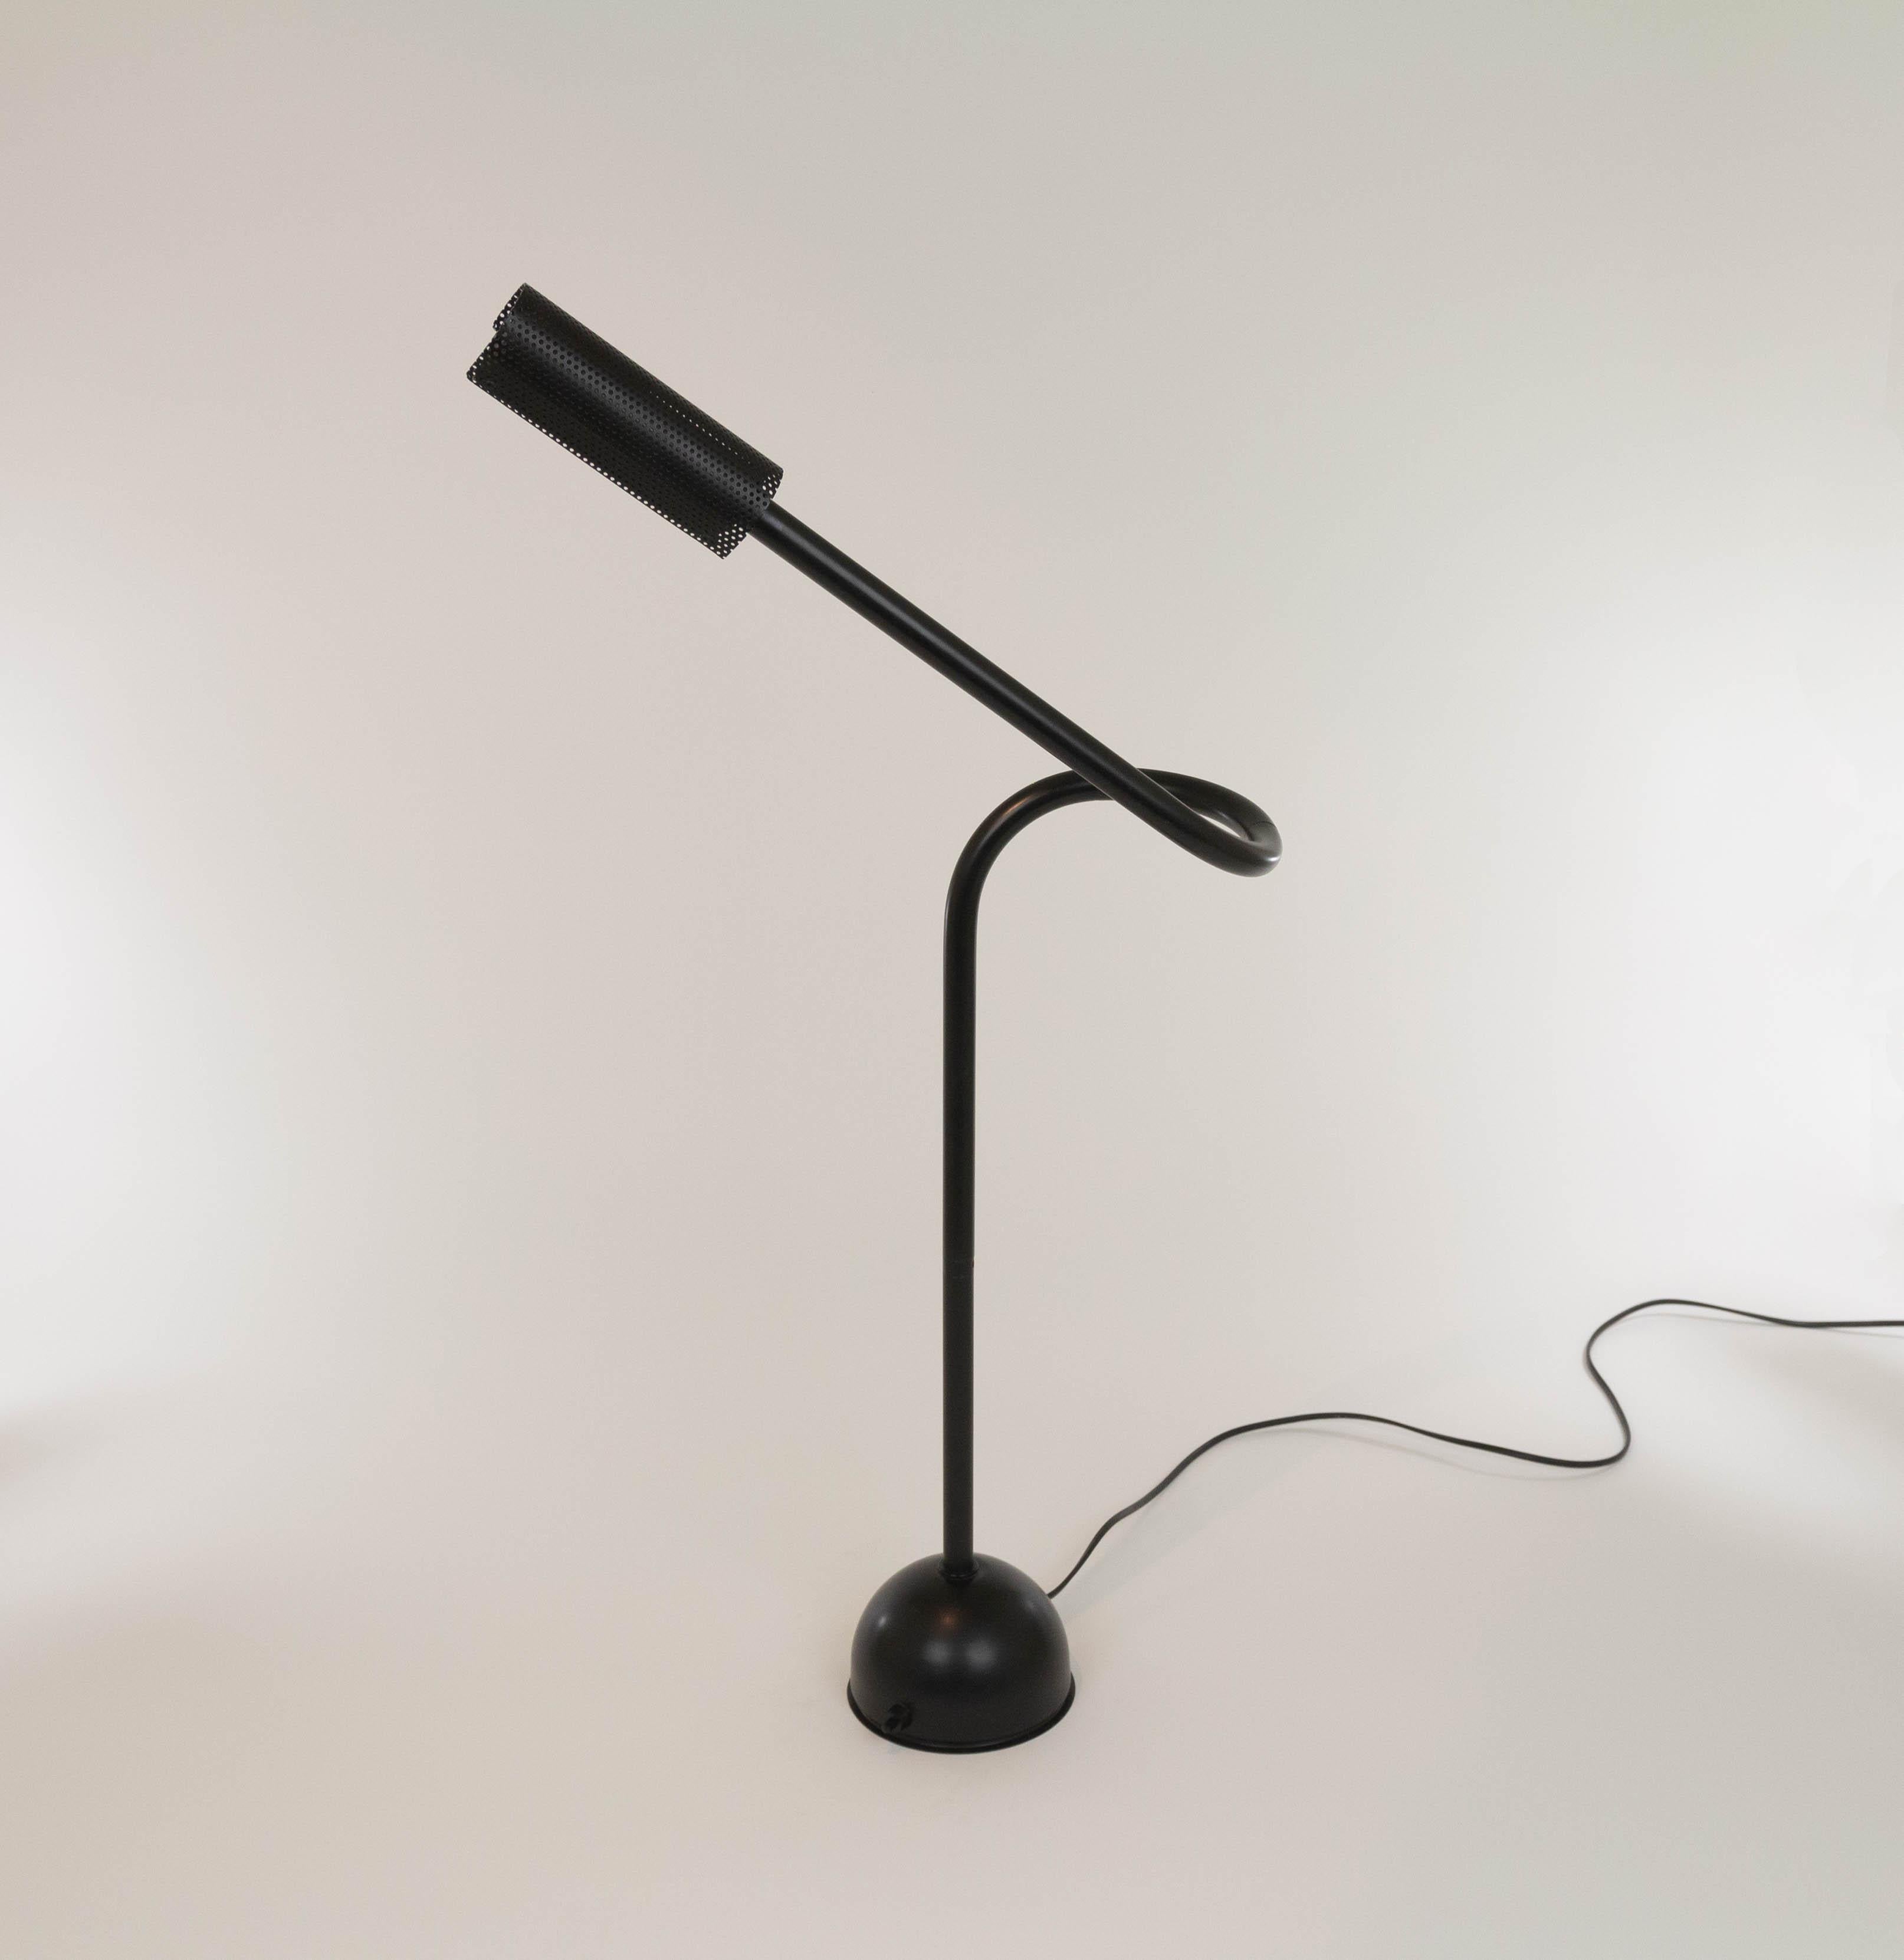 Black Stringa table lamp created by Dutch designer Hans Ansems and manufactured by Luxo Italiana in 1982.

The original structure and a brilliant technological solution of the table lamp allow full flexibility and offer continuous visual